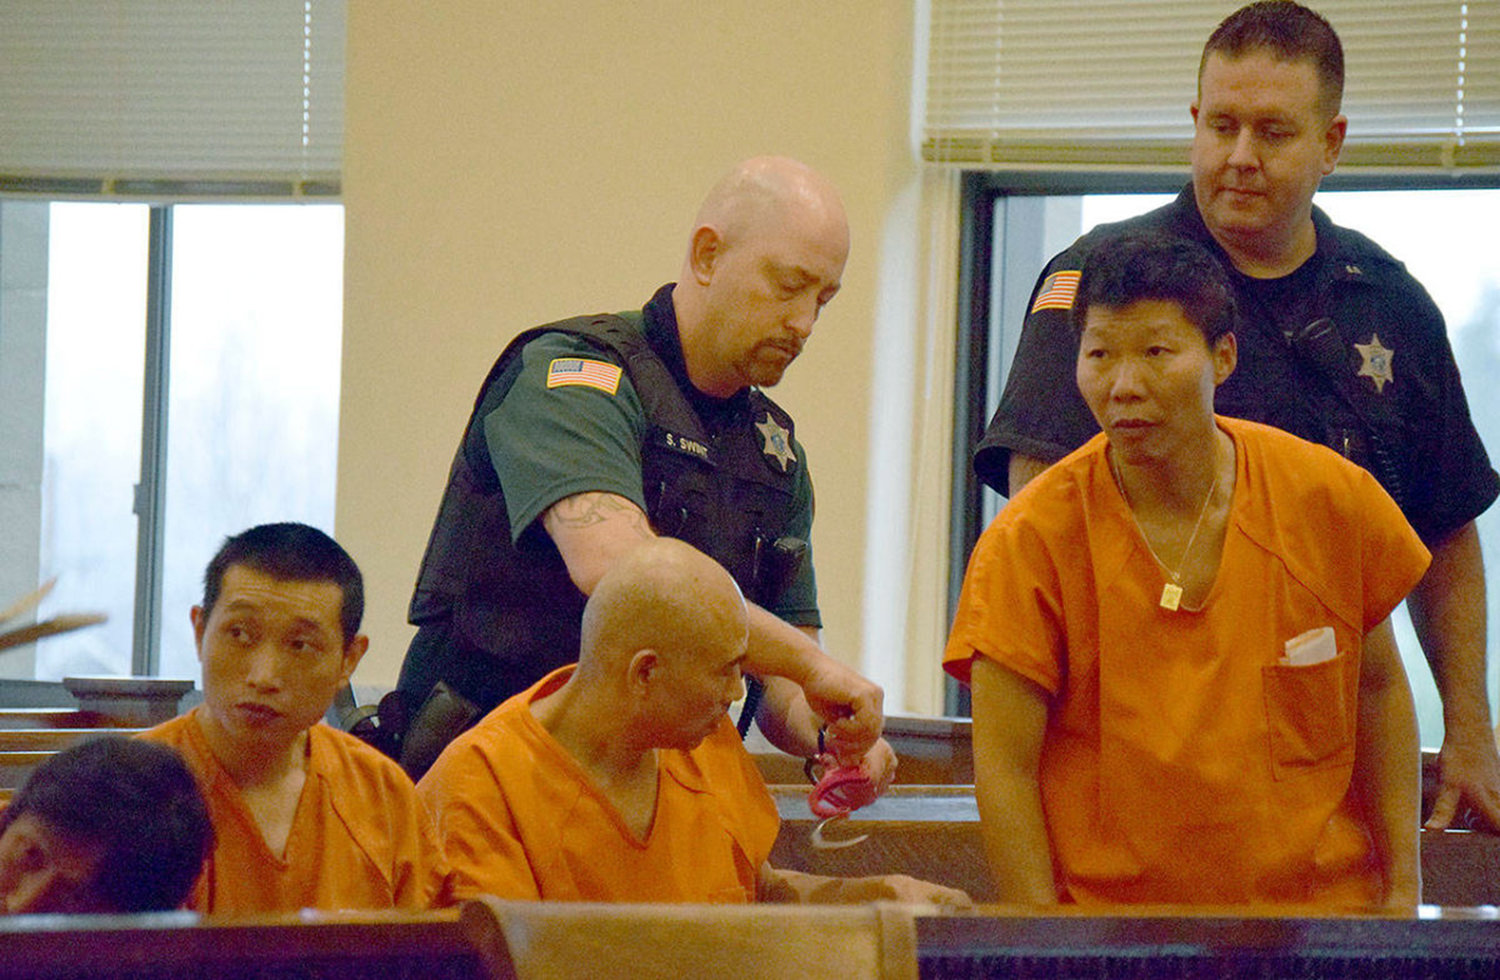 Four Chinese men arrested in relation to a major illegal marijuana grow operation made their initial appearance in Grays Harbor County Superior Court on Friday afternoon. Their arraignment was set for Dec. 11.